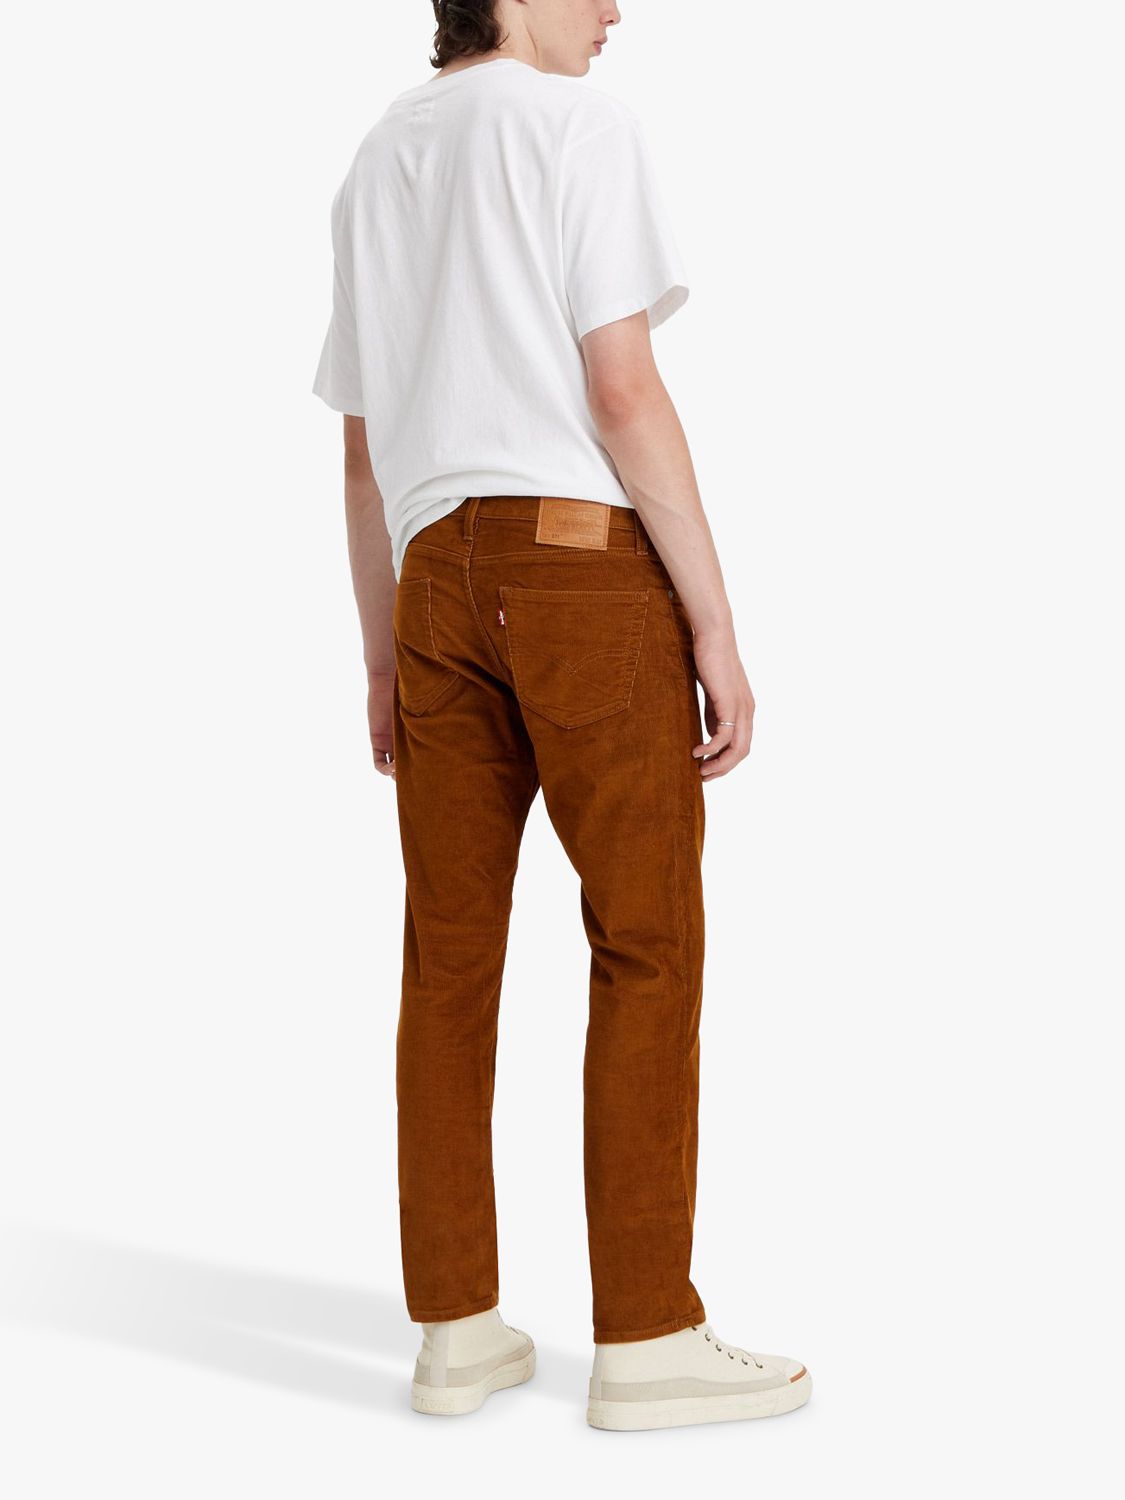 Levi's 511 Slim Fit Chinos, Monks Robe S at John Lewis & Partners